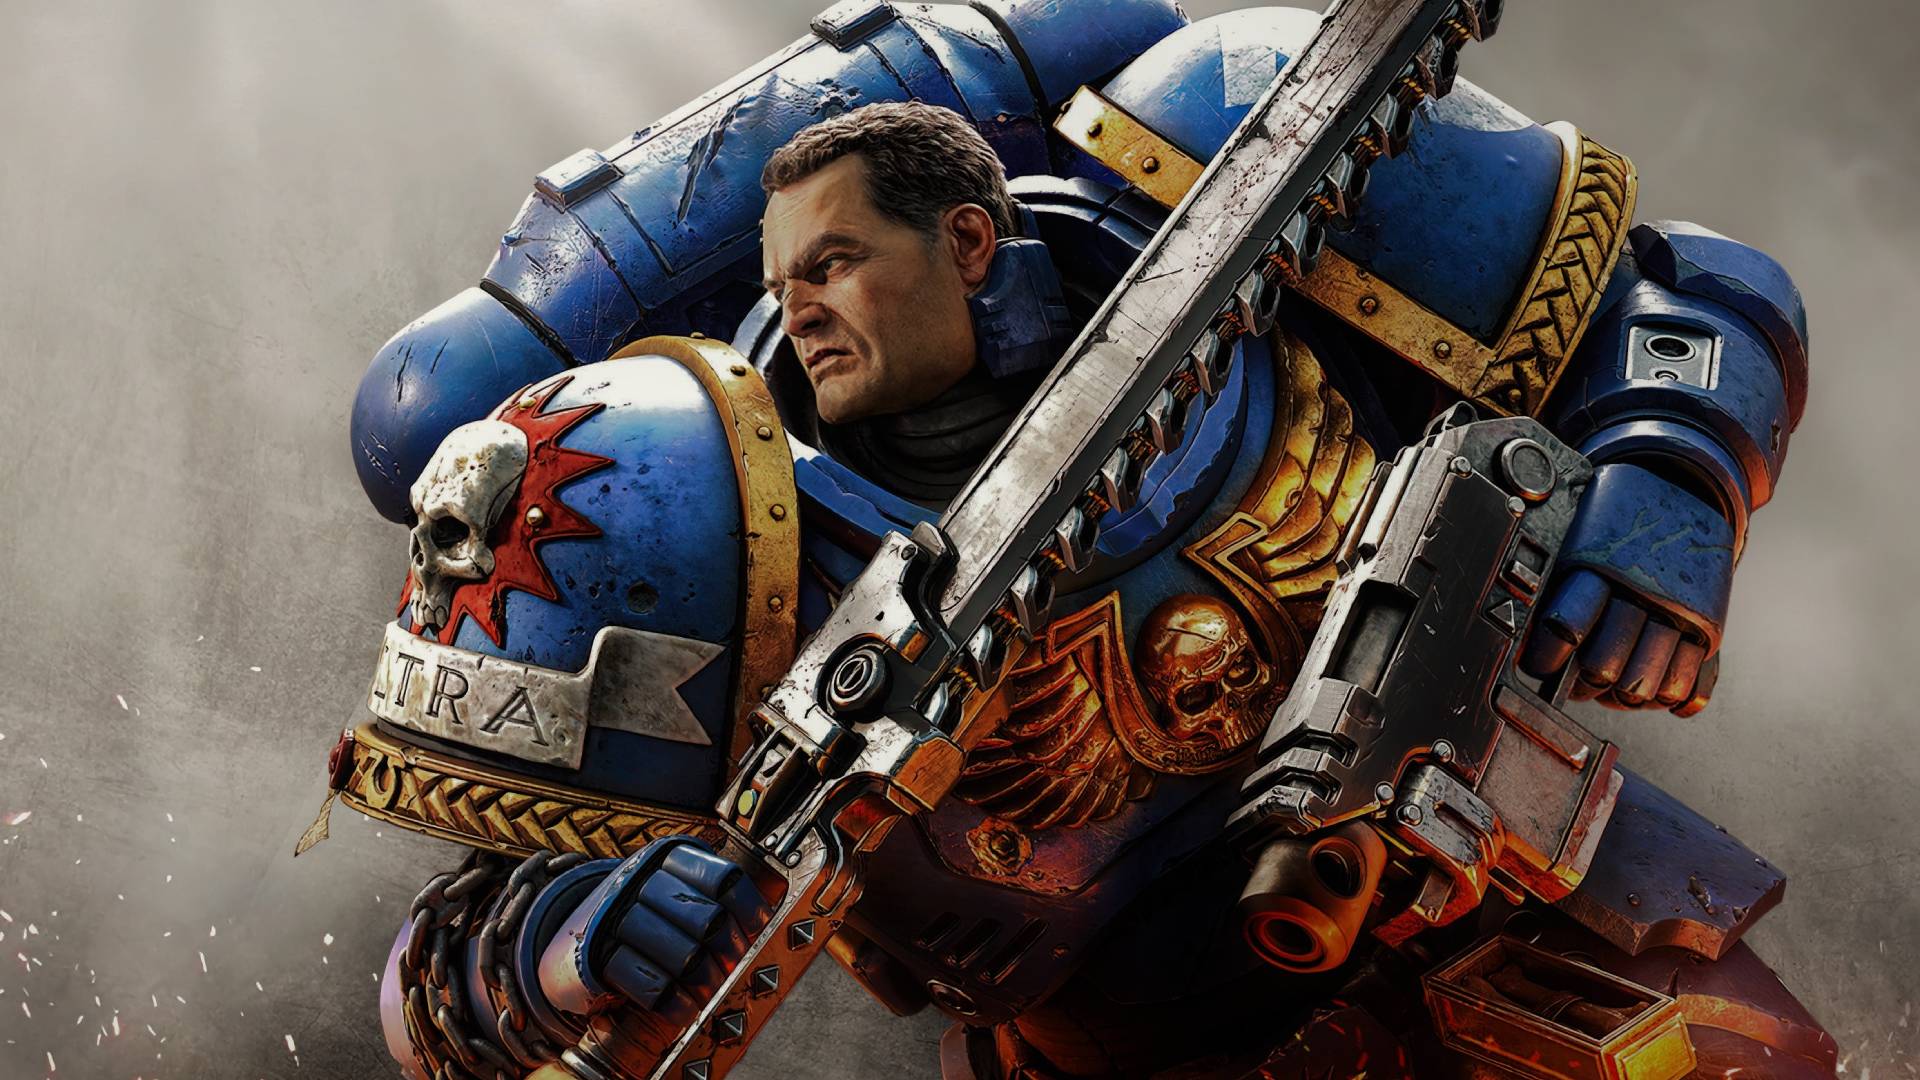 Warhammer 40k Space Marine 2 is getting a beta, and you can apply